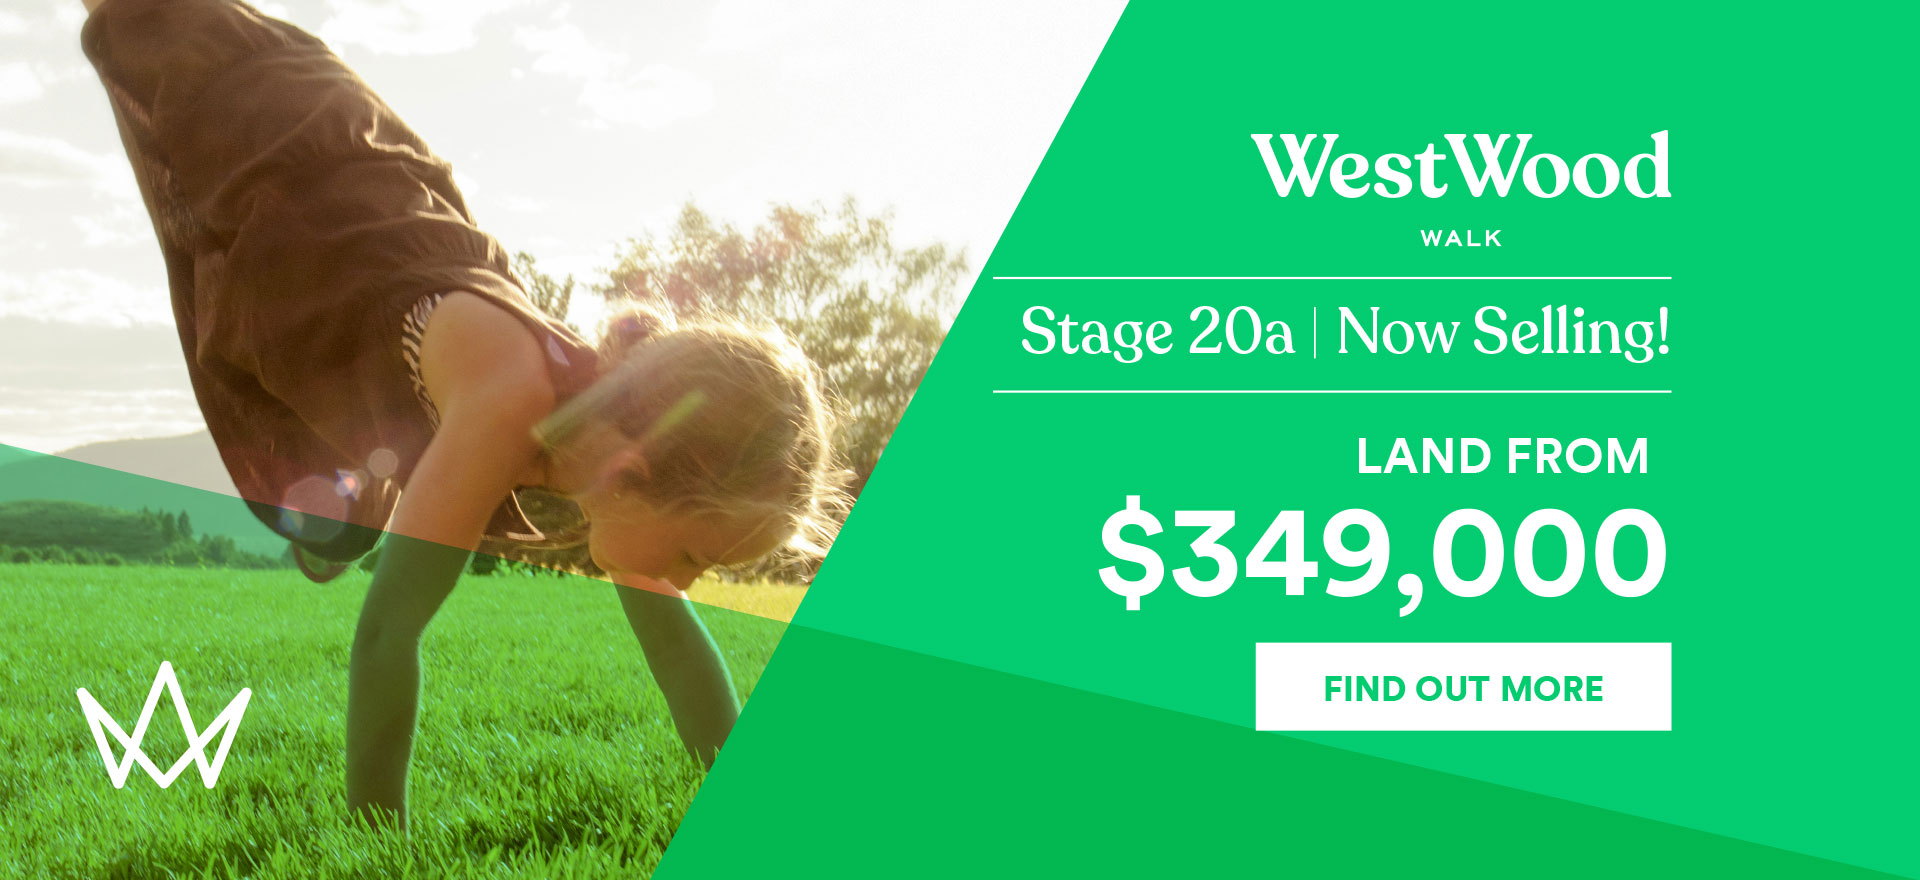 Now Selling Westwood Walk Stage 20a